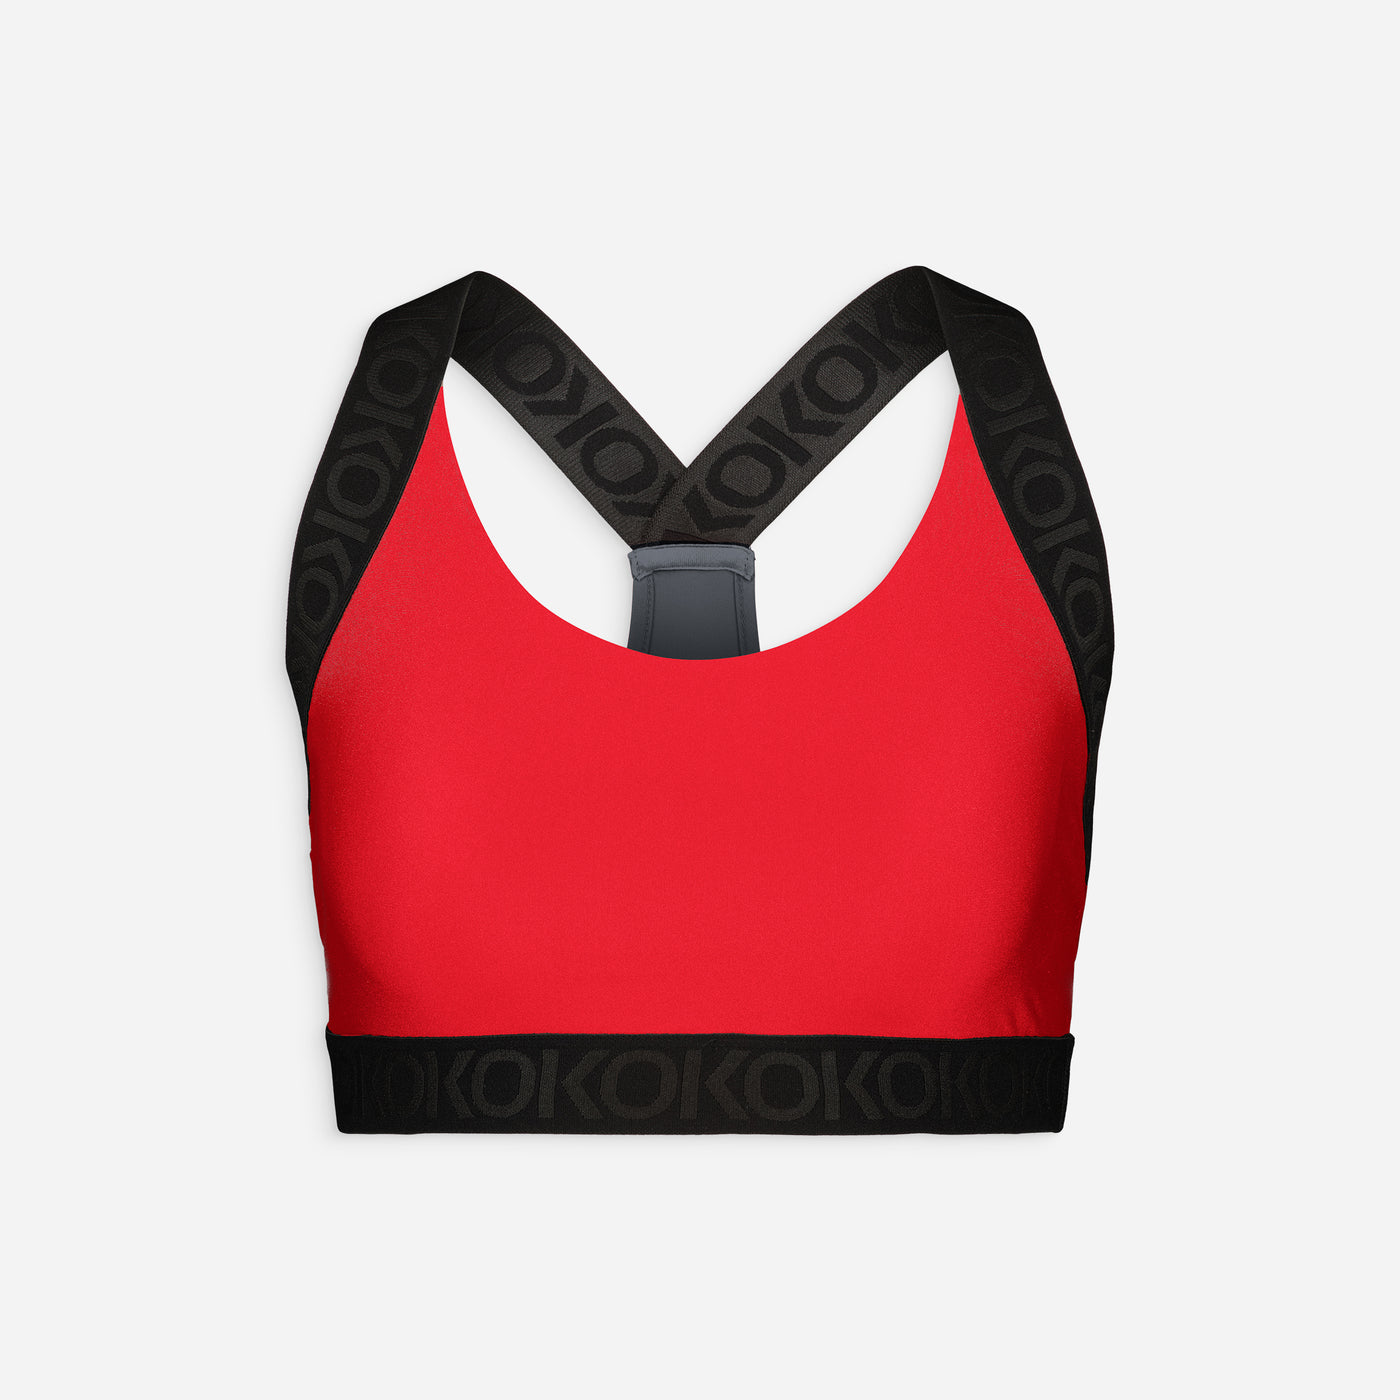 Boxing 2-In-1 Sports Bra: Support and Protection - Black/Red